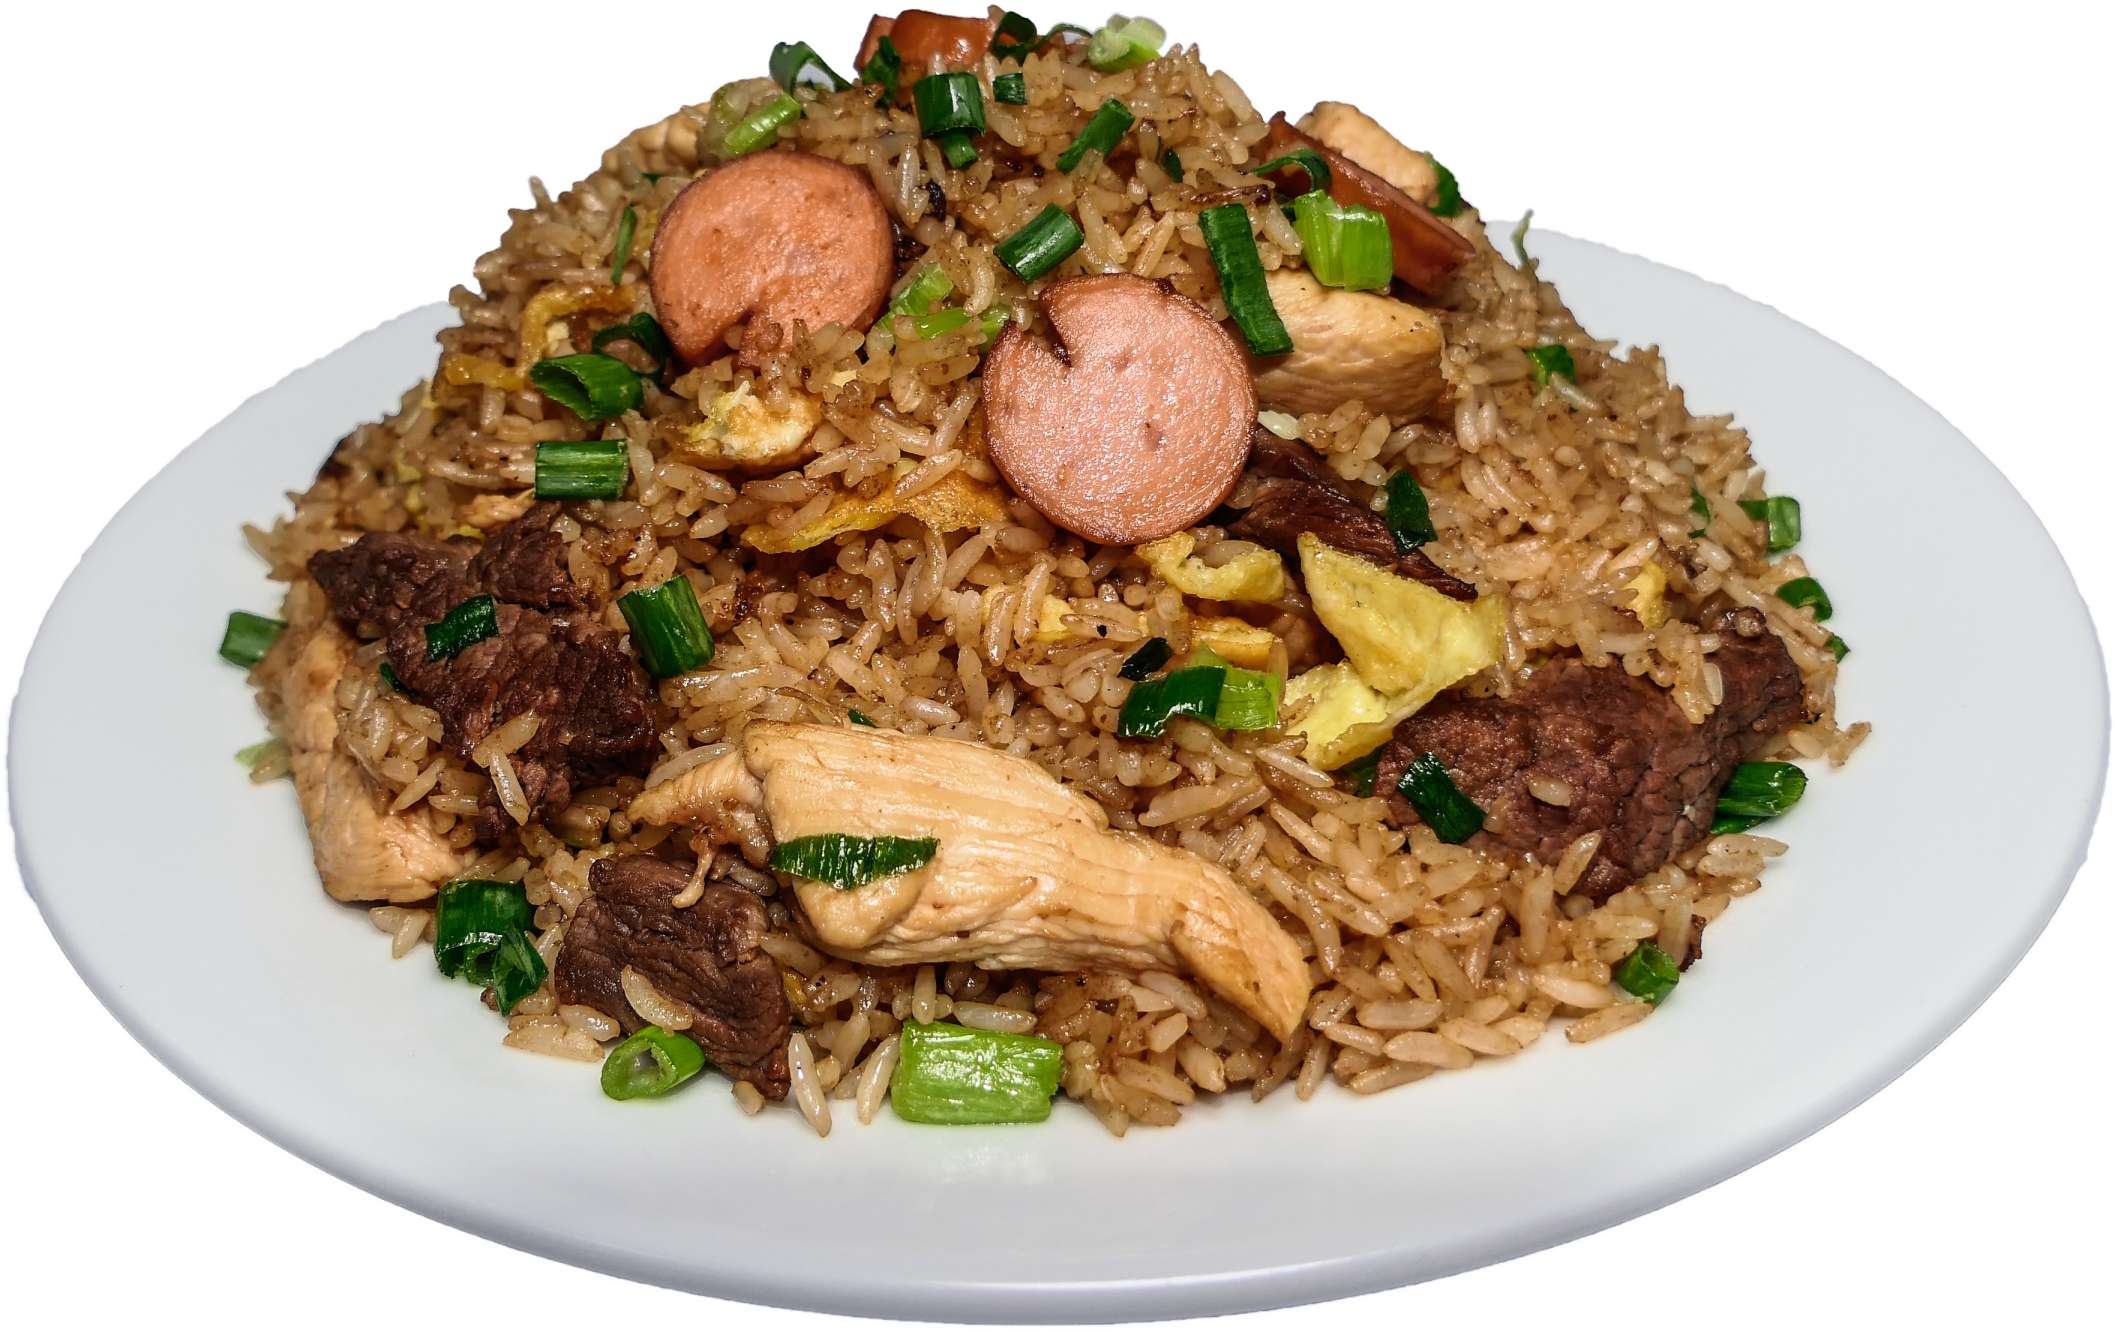 peruvian-food-arroz-chaufa-plate-fried-rice-with-vegetables-different-meats-new